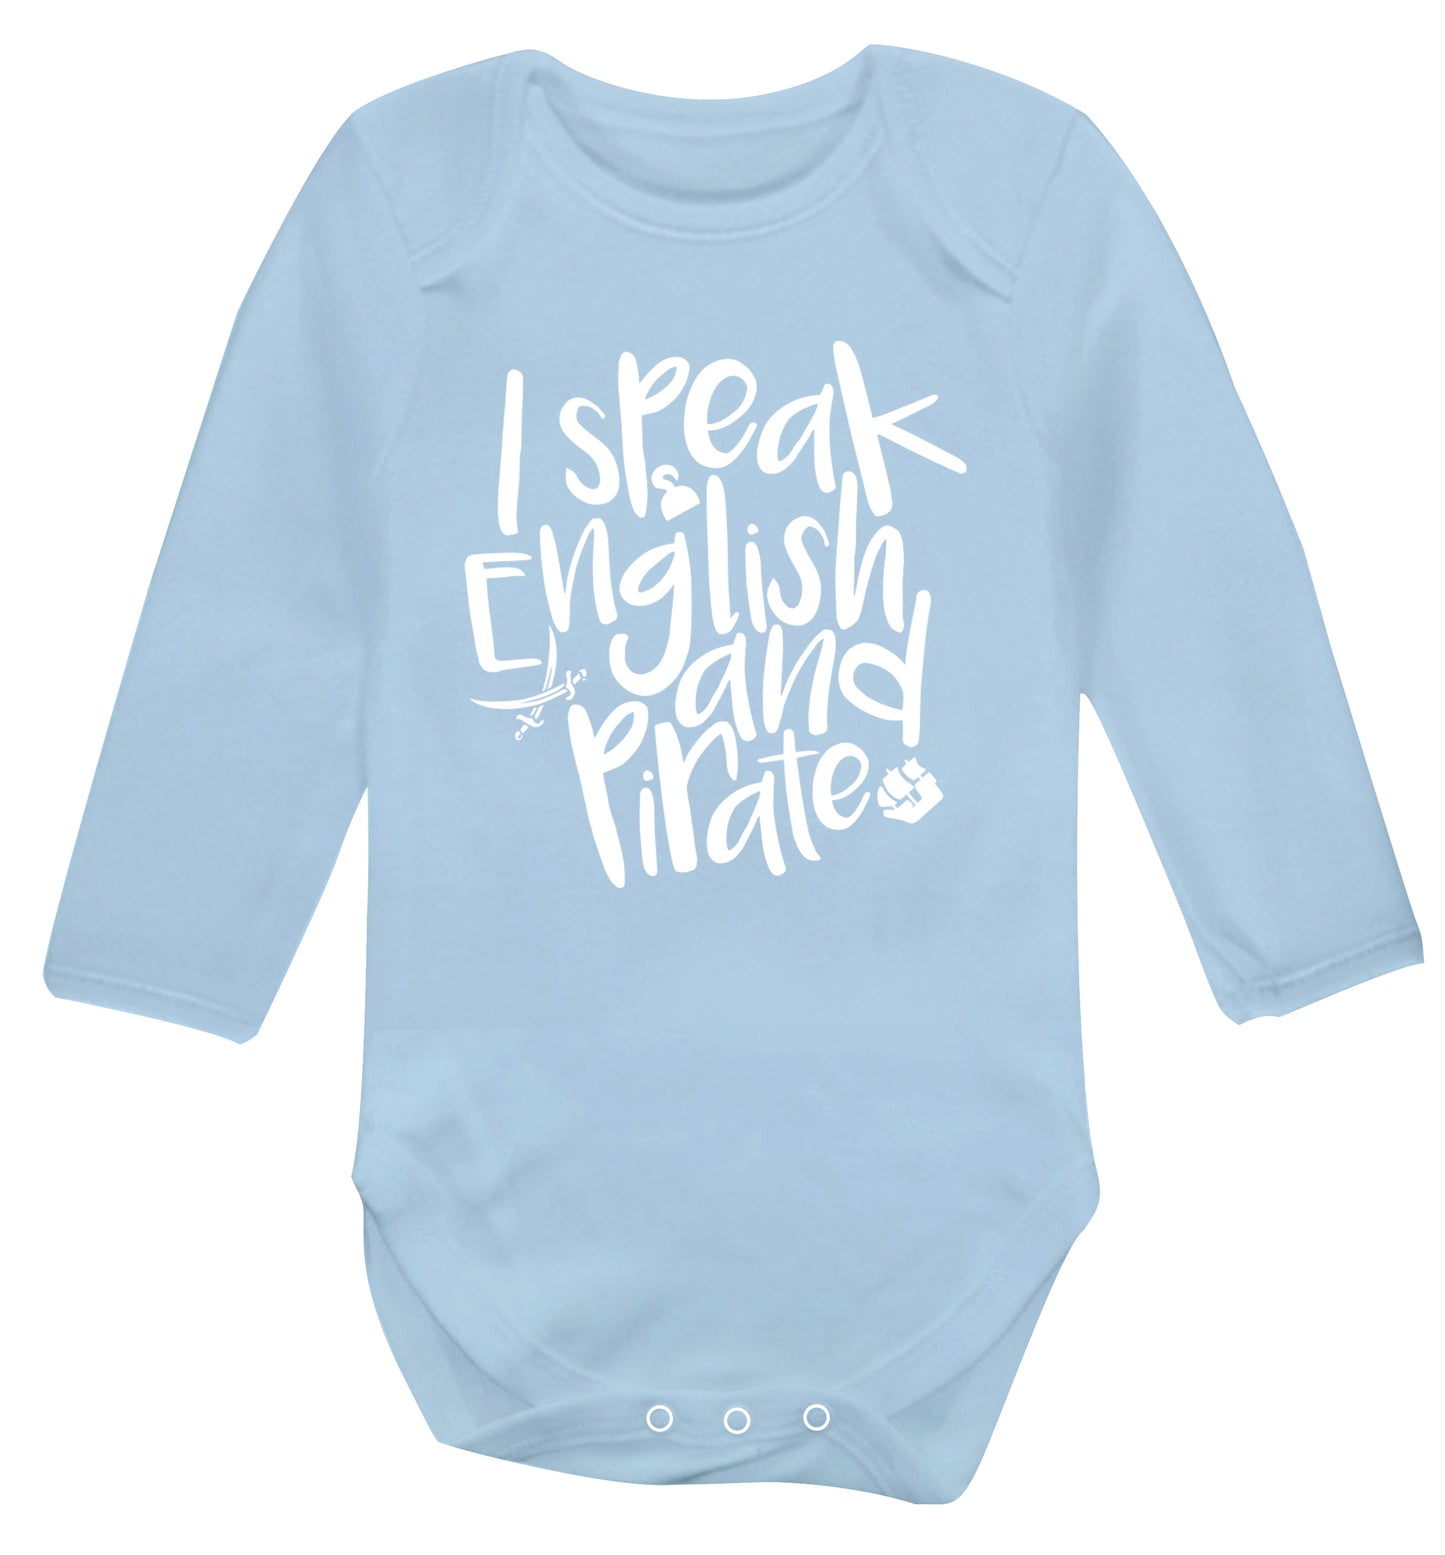 I speak English and pirate Baby Vest long sleeved pale blue 6-12 months